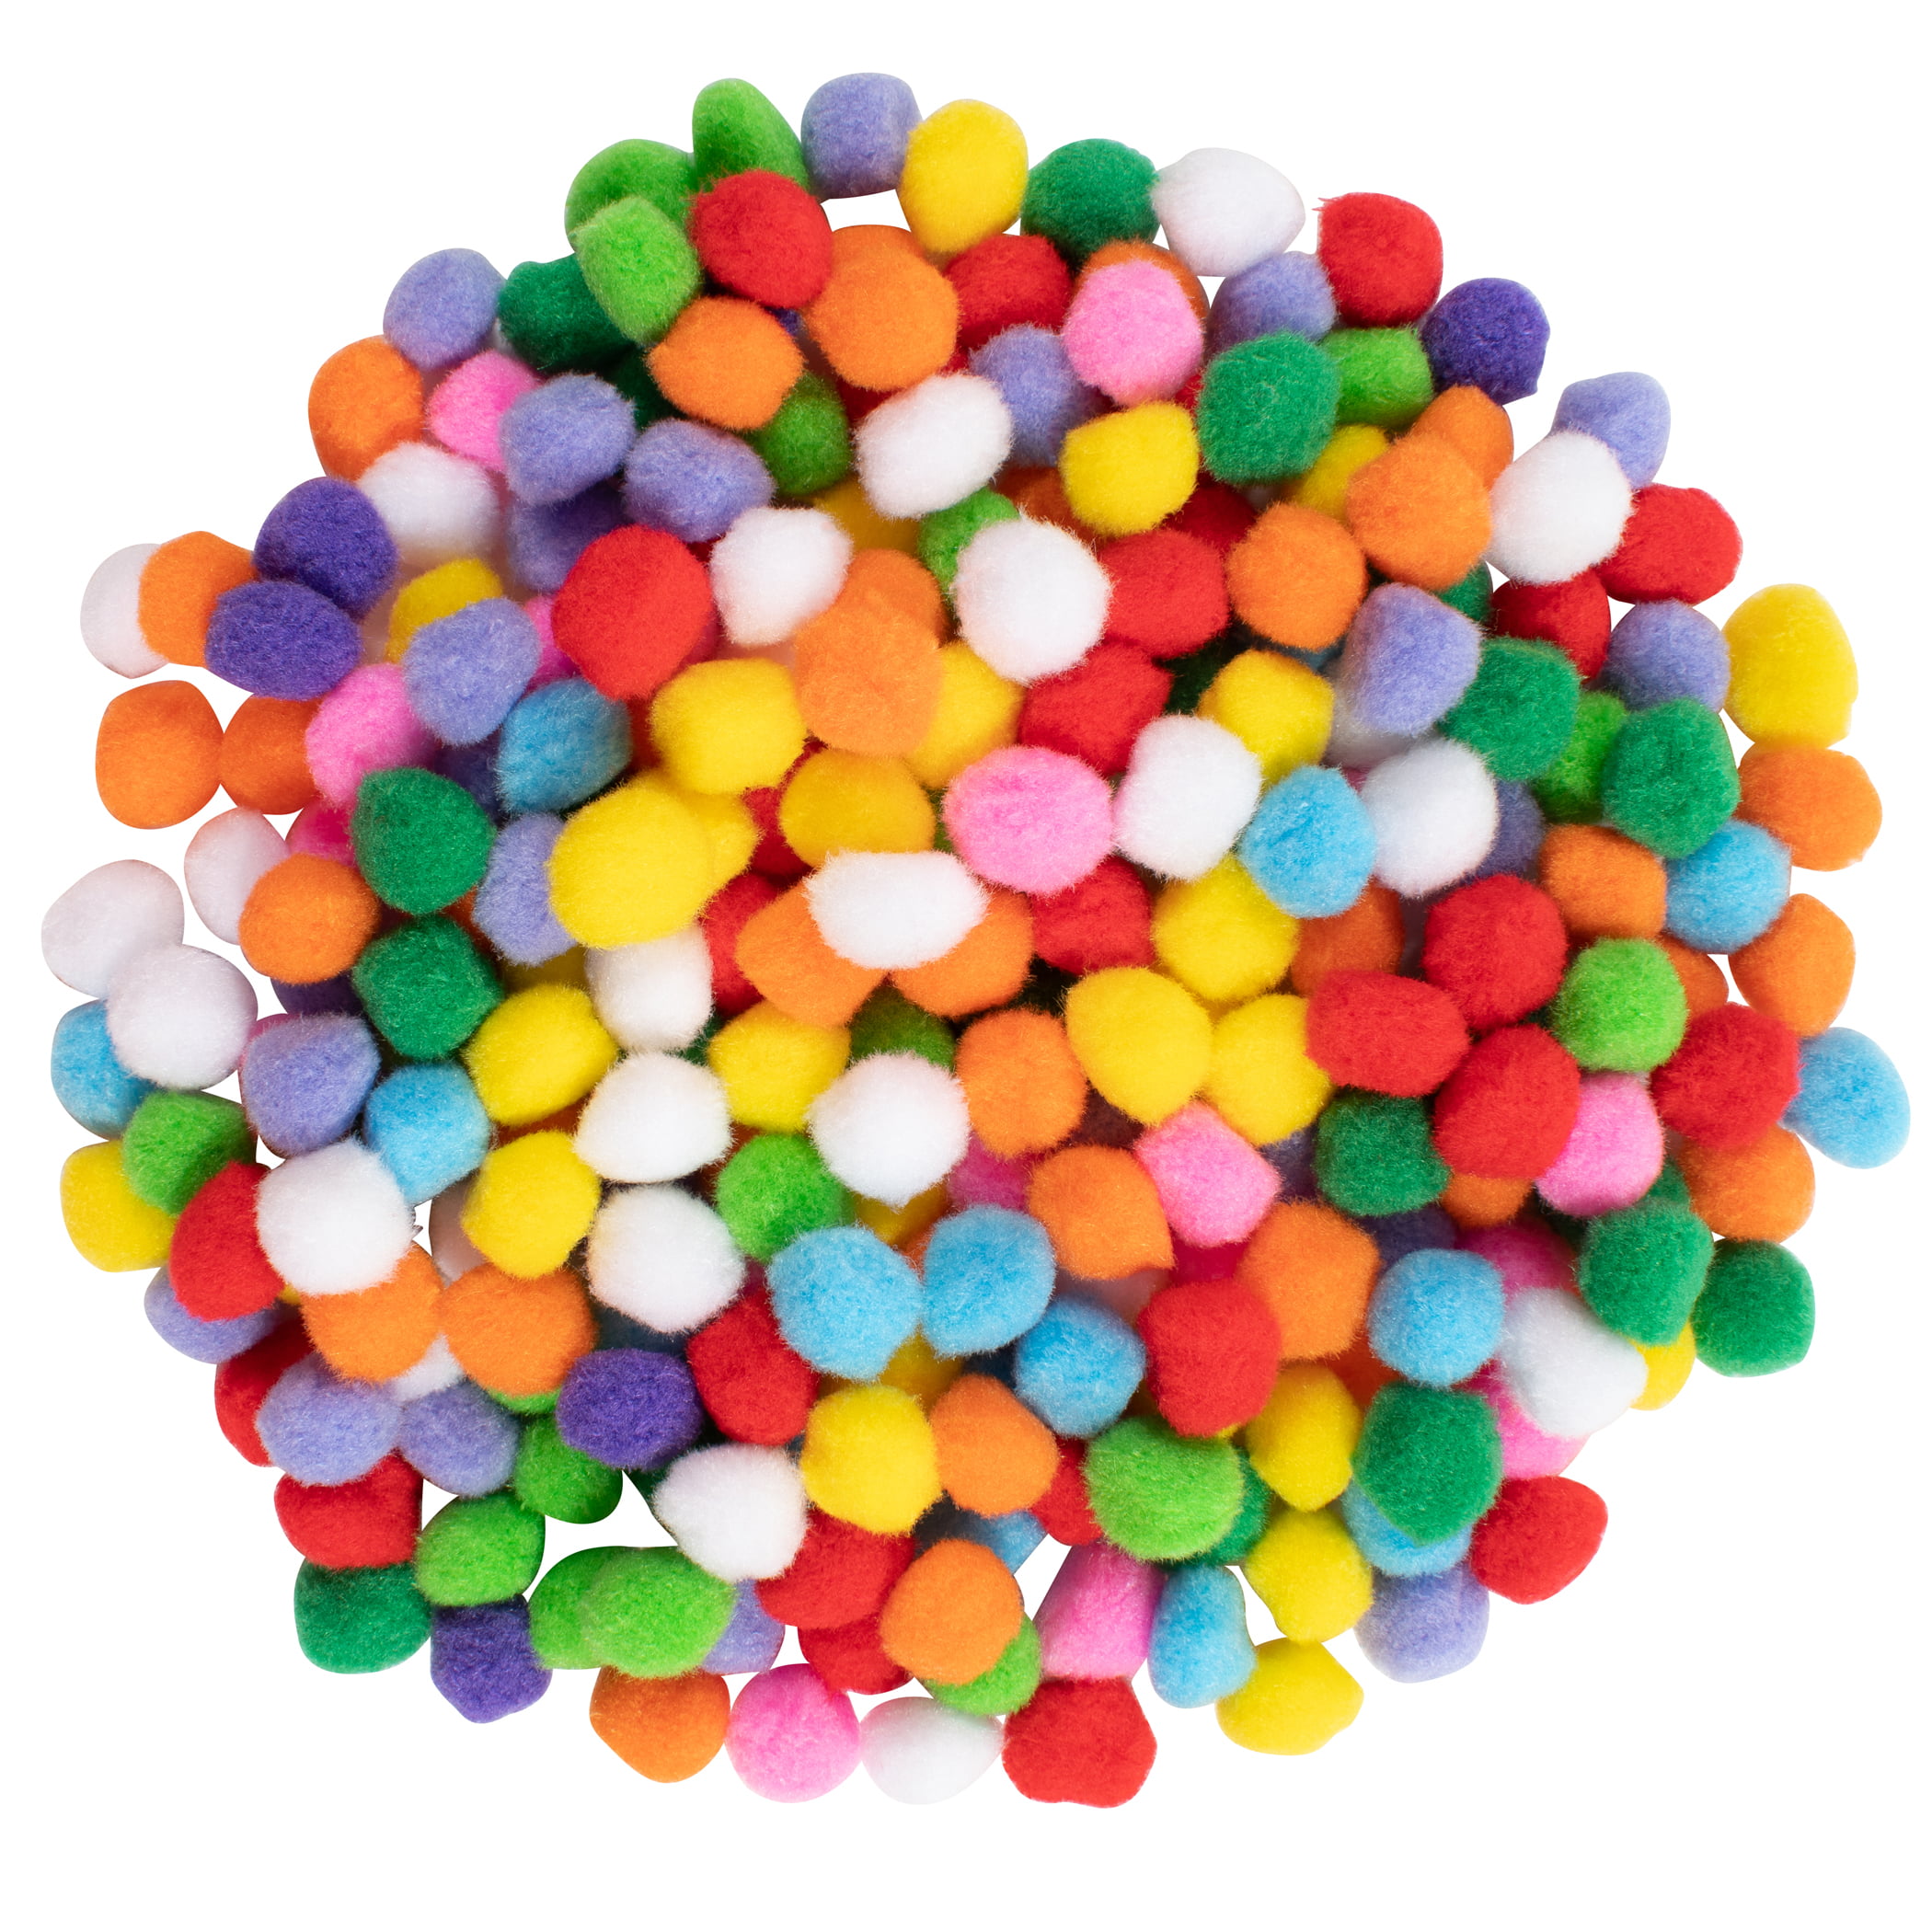 READY 2 LEARN Pom Poms - Assorted Colors - 240 Per Pack - 3 Packs 